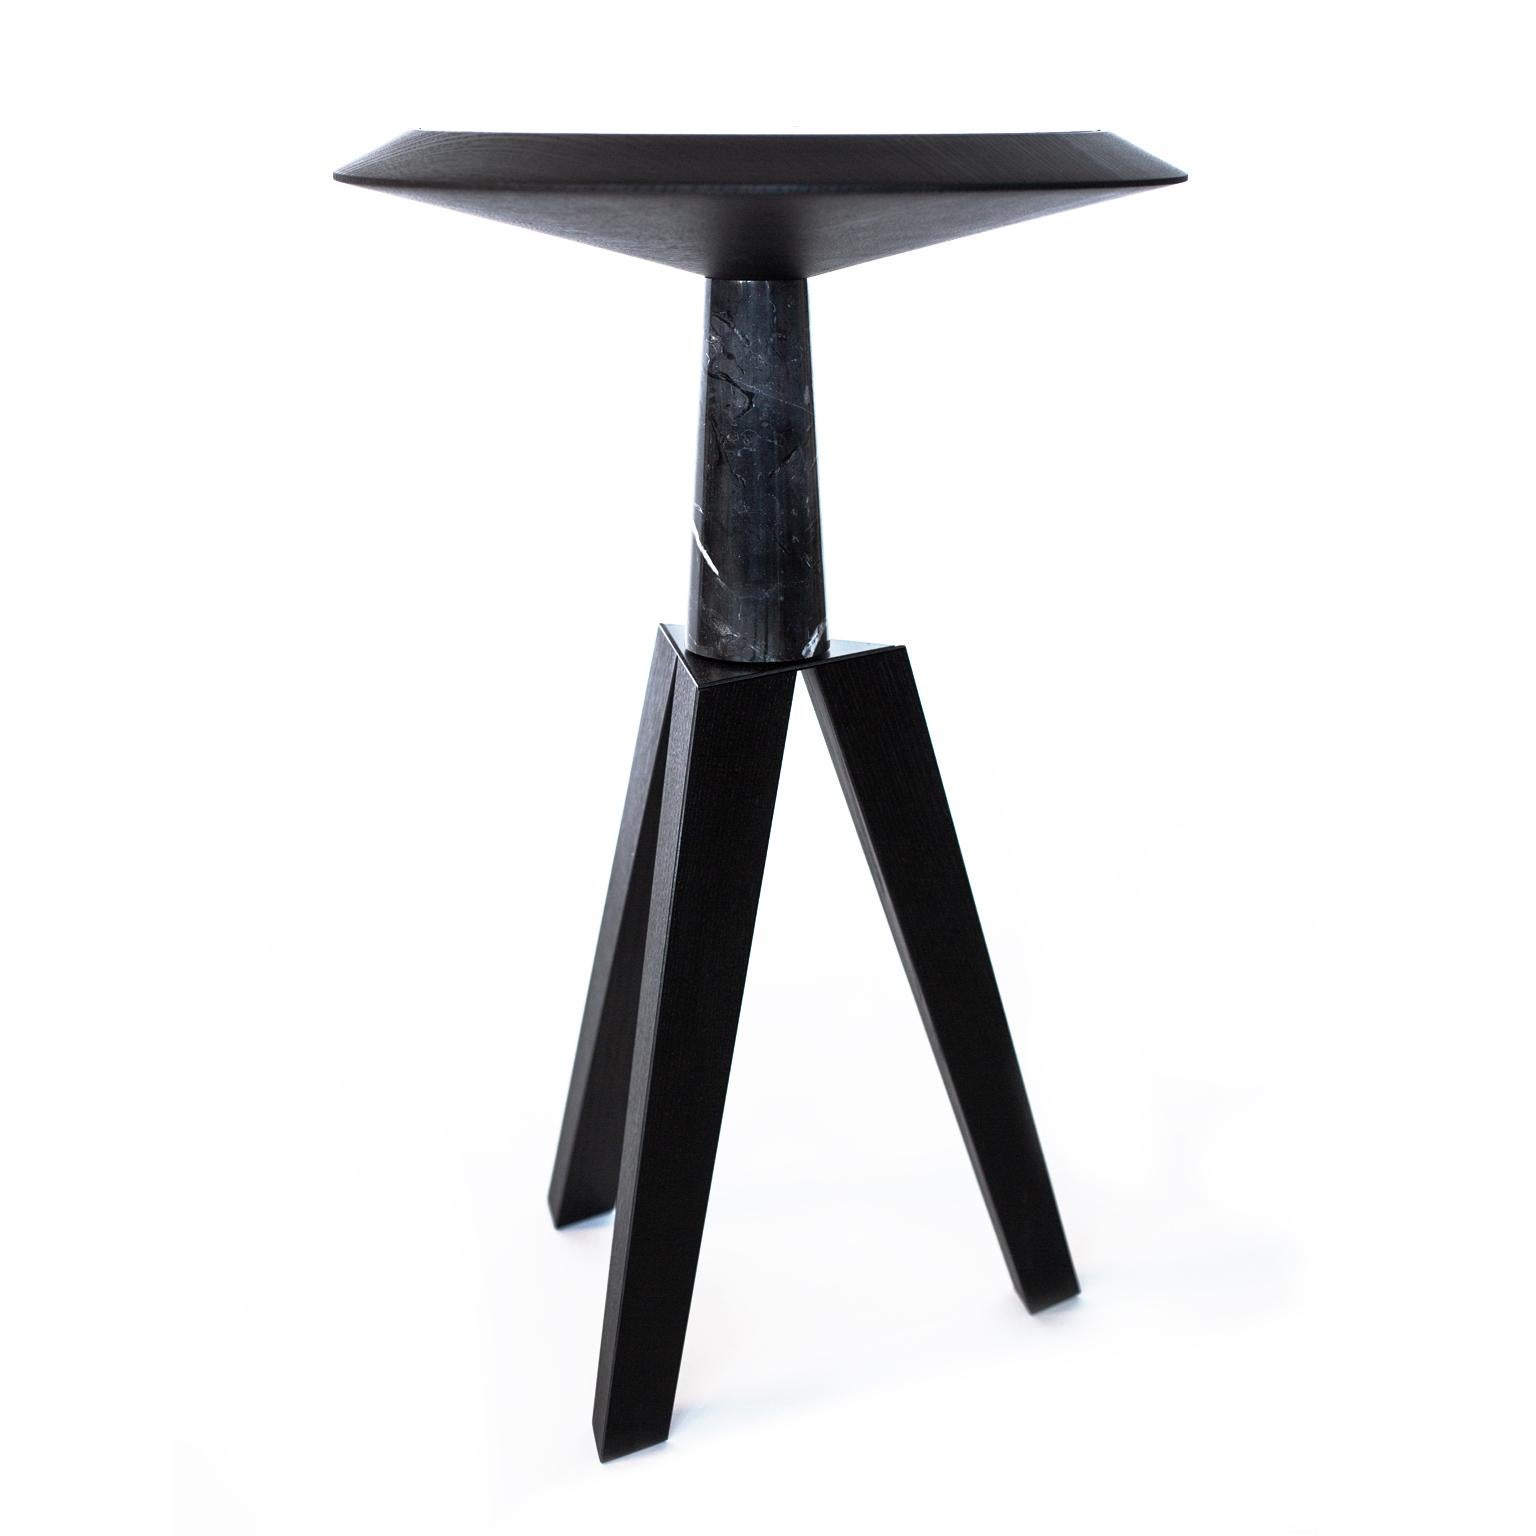 JOLE is the first small contemporary object, which will be introduced to the collection of  Studio One Plus Eleven. Although so small, the black coffee table introduces a range of unique details such as Marble Nero Marquina and Oak Wood. This object